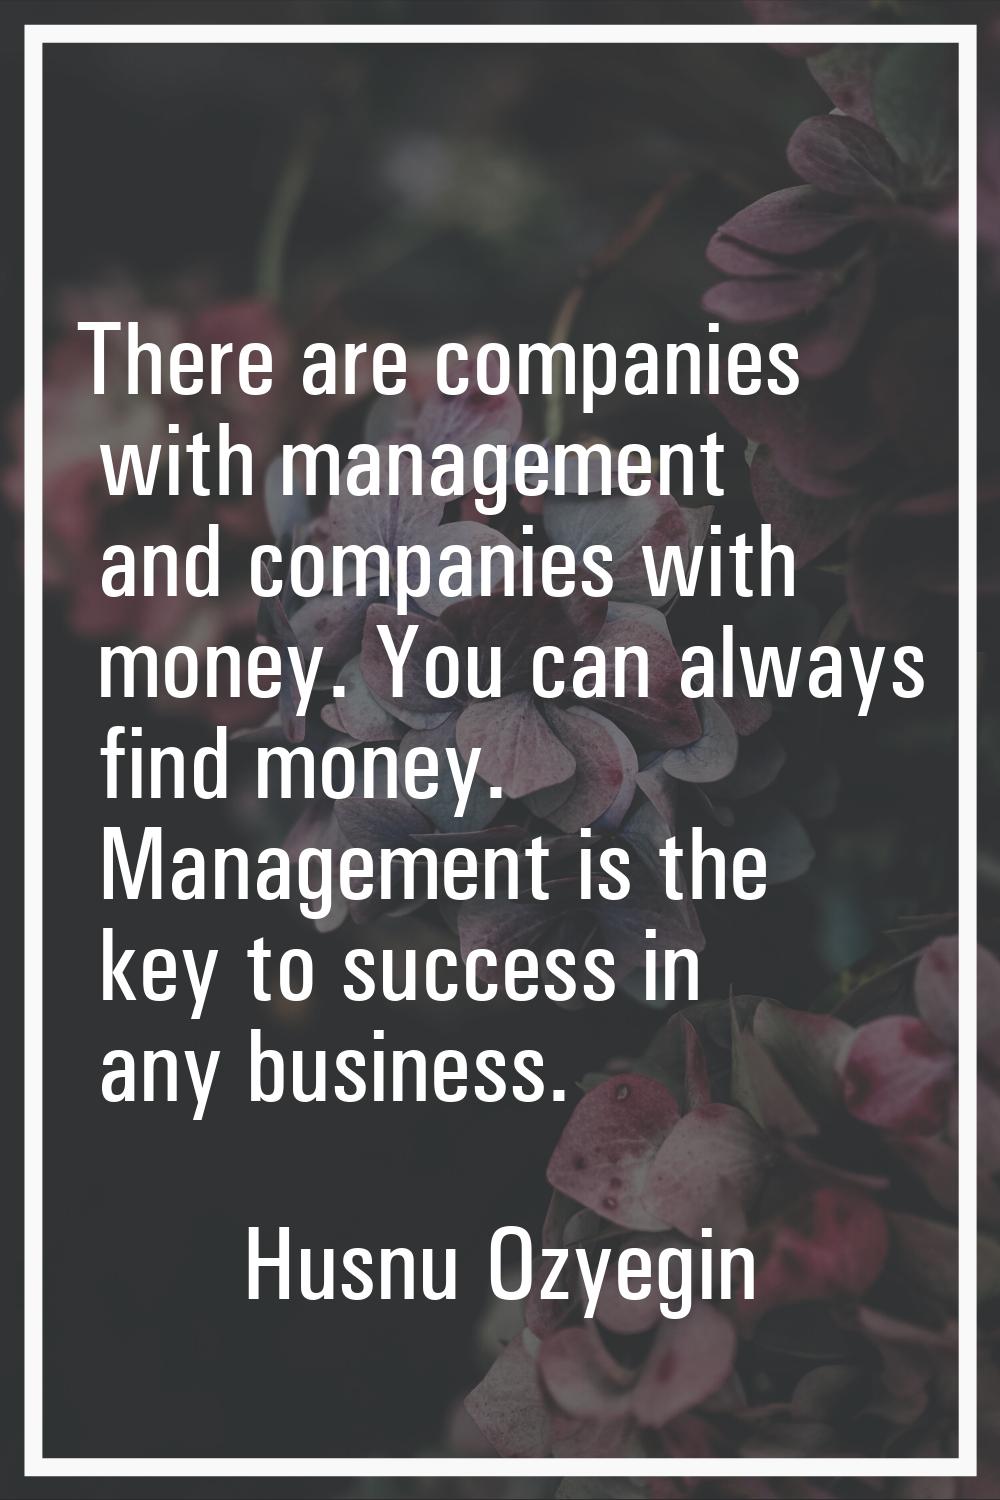 There are companies with management and companies with money. You can always find money. Management